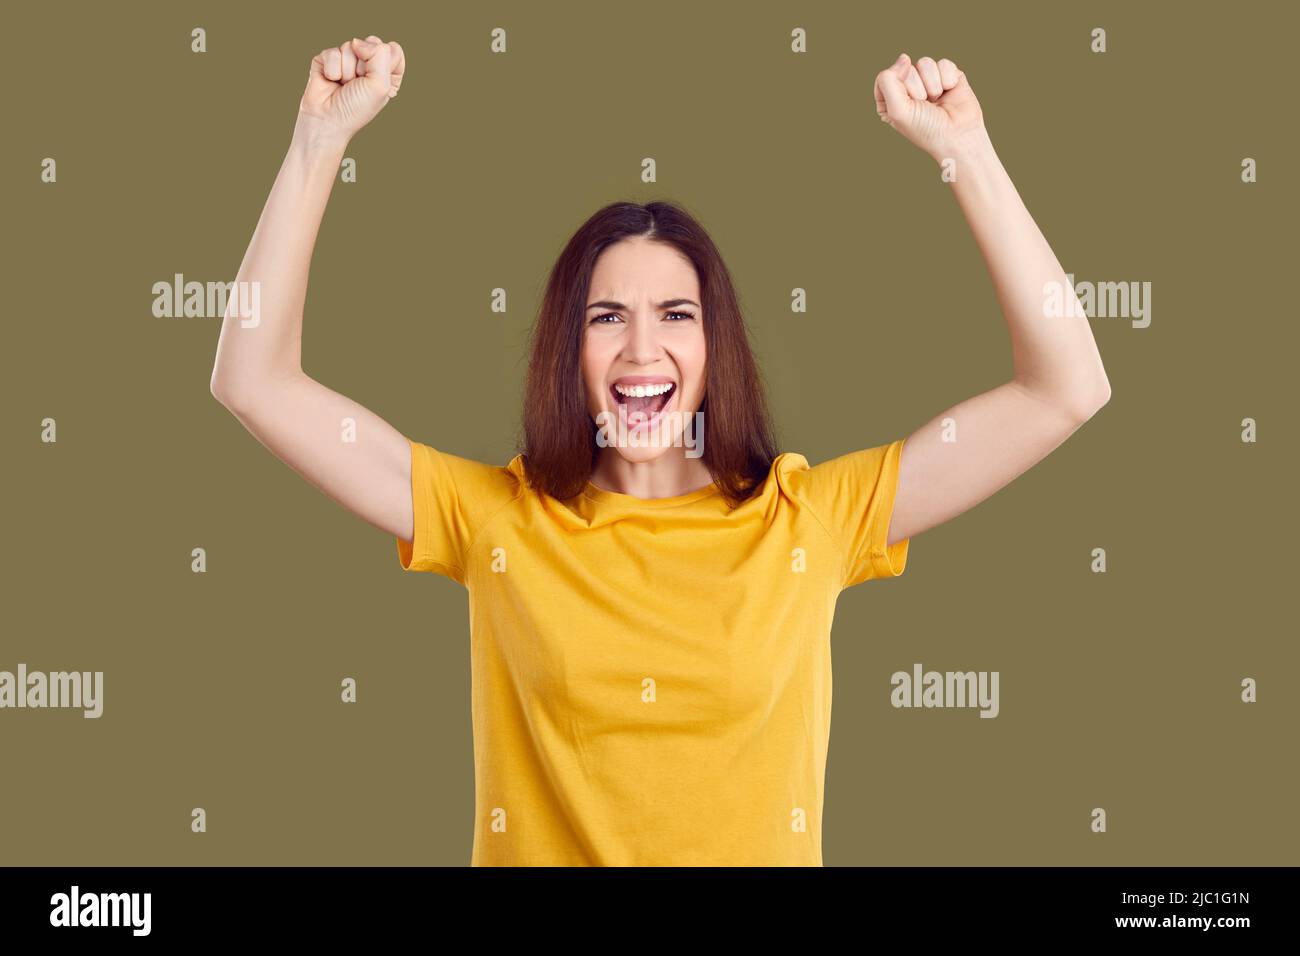 Crazy happy woman sincerely rejoices in her success and triumph on khaki background. Stock Photo